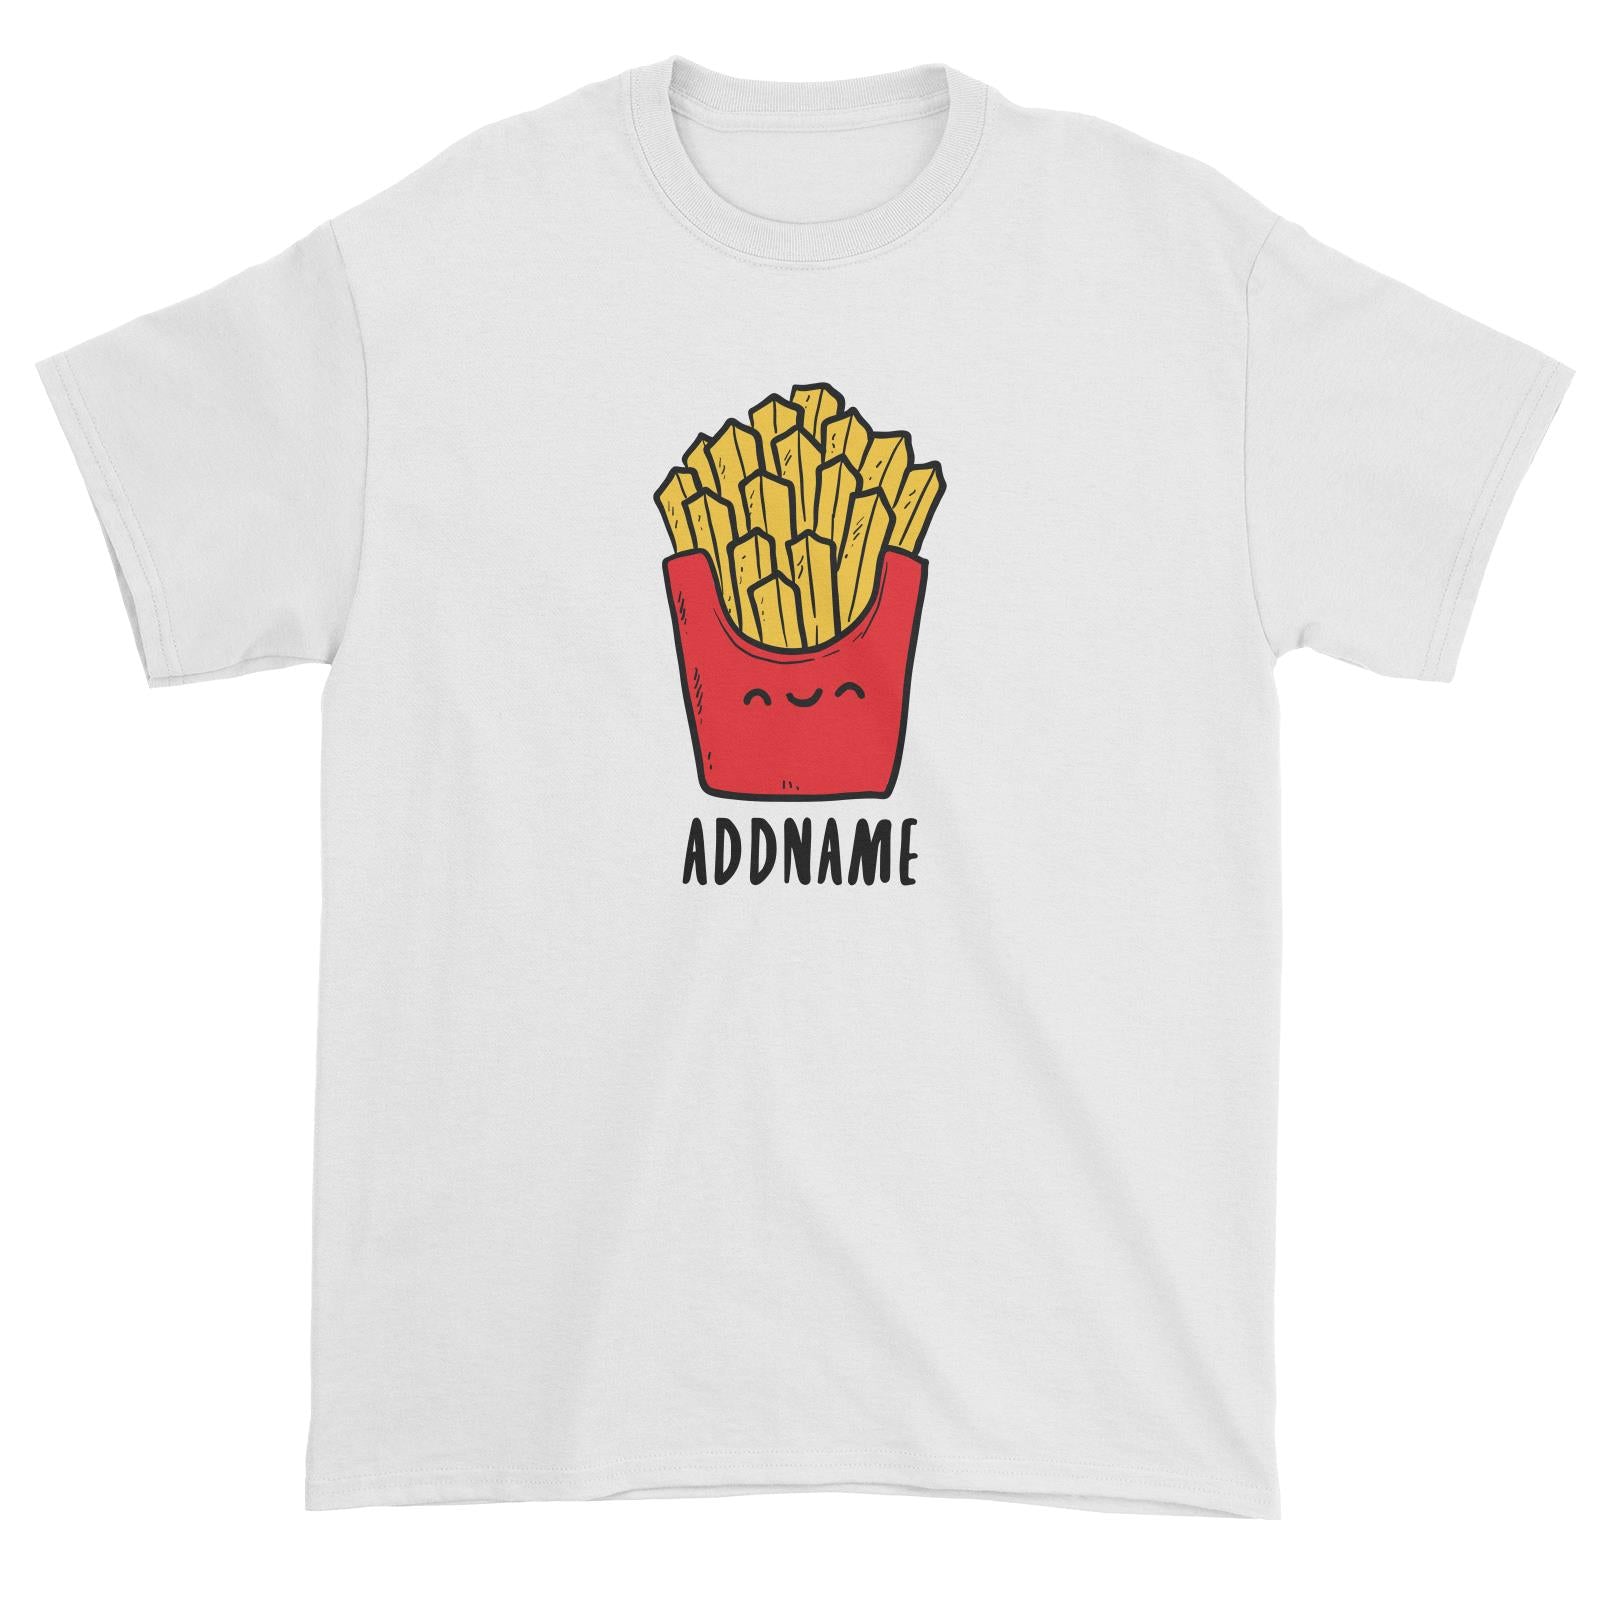 Fast Food Fries Addname Unisex T-Shirt  Matching Family Comic Cartoon Personalizable Designs